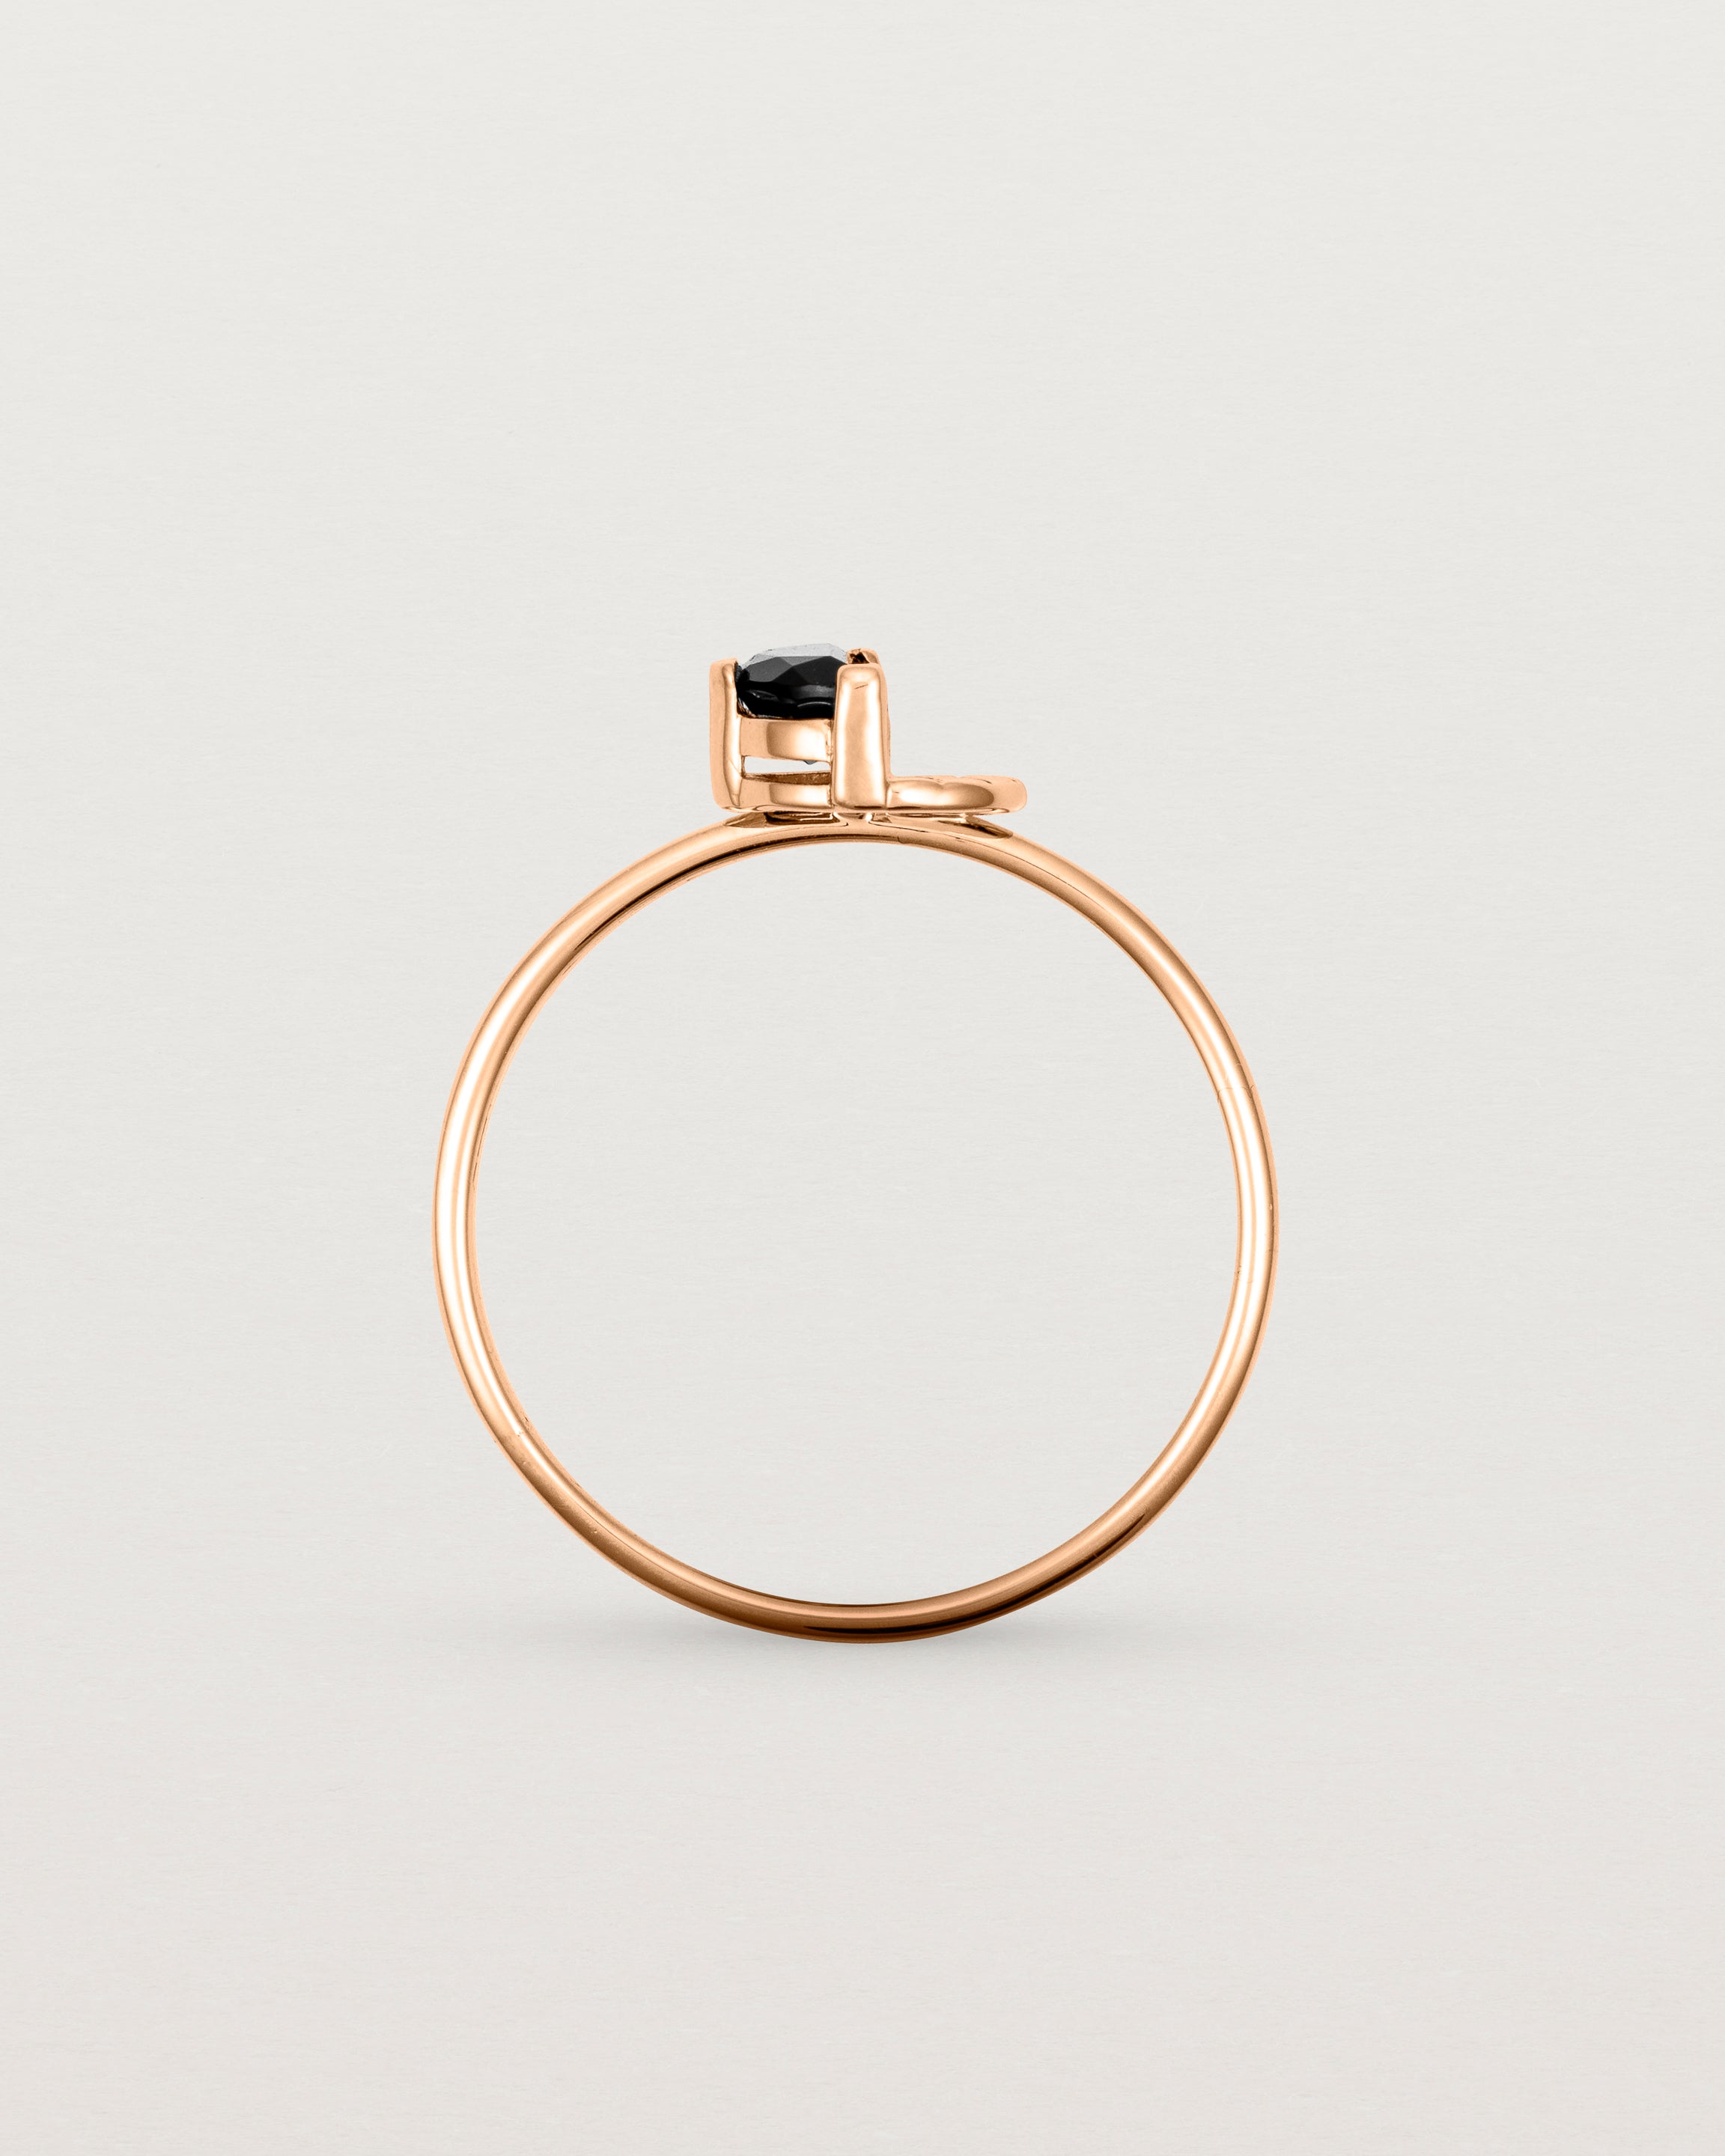 Standing view of the Jia Stone Ring | Black Spinel in Rose Gold.